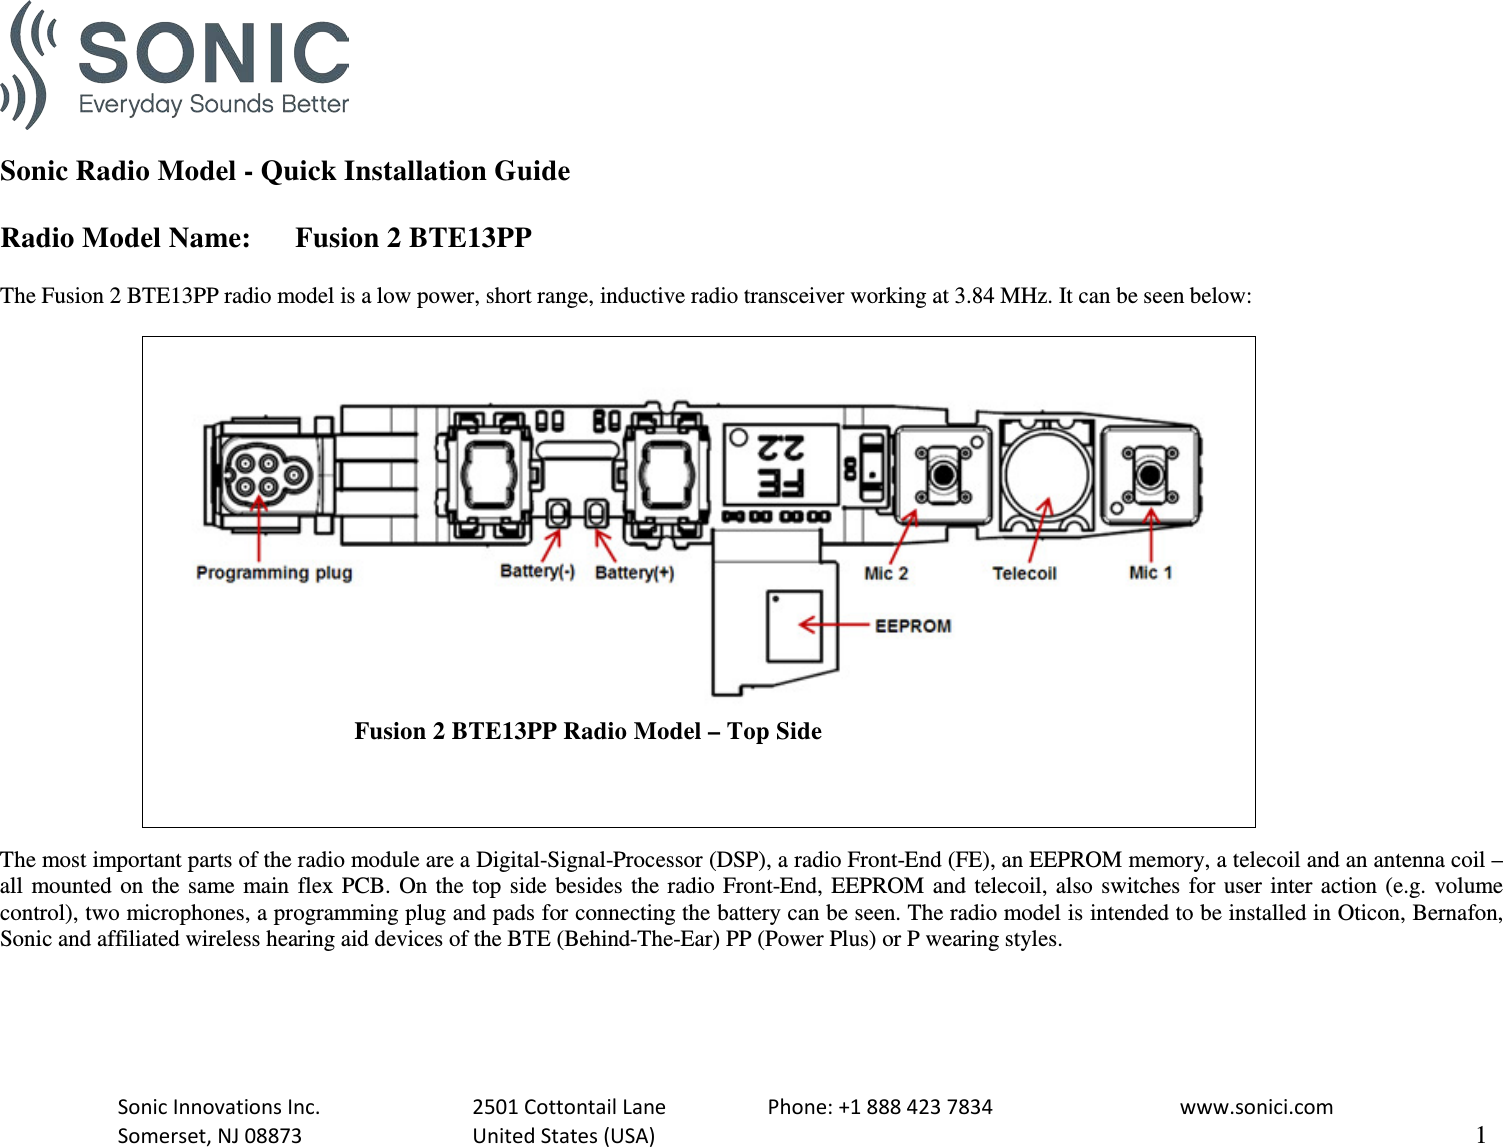   Sonic Radio Model - Quick Installation Guide  Radio Model Name: Fusion 2 BTE13PP  The Fusion 2 BTE13PP radio model is a low power, short range, inductive radio transceiver working at 3.84 MHz. It can be seen below:                                       Fusion 2 BTE13PP Radio Model – Top Side  The most important parts of the radio module are a Digital-Signal-Processor (DSP), a radio Front-End (FE), an EEPROM memory, a telecoil and an antenna coil – all mounted on the same main flex PCB. On the top side besides the radio Front-End, EEPROM and telecoil, also switches for user inter action (e.g. volume control), two microphones, a programming plug and pads for connecting the battery can be seen. The radio model is intended to be installed in Oticon, Bernafon, Sonic and affiliated wireless hearing aid devices of the BTE (Behind-The-Ear) PP (Power Plus) or P wearing styles.   Sonic Innovations Inc.    2501 Cottontail Lane    Phone: +1 888 423 7834   www.sonici.com  Somerset, NJ 08873    United States (USA)                     1  